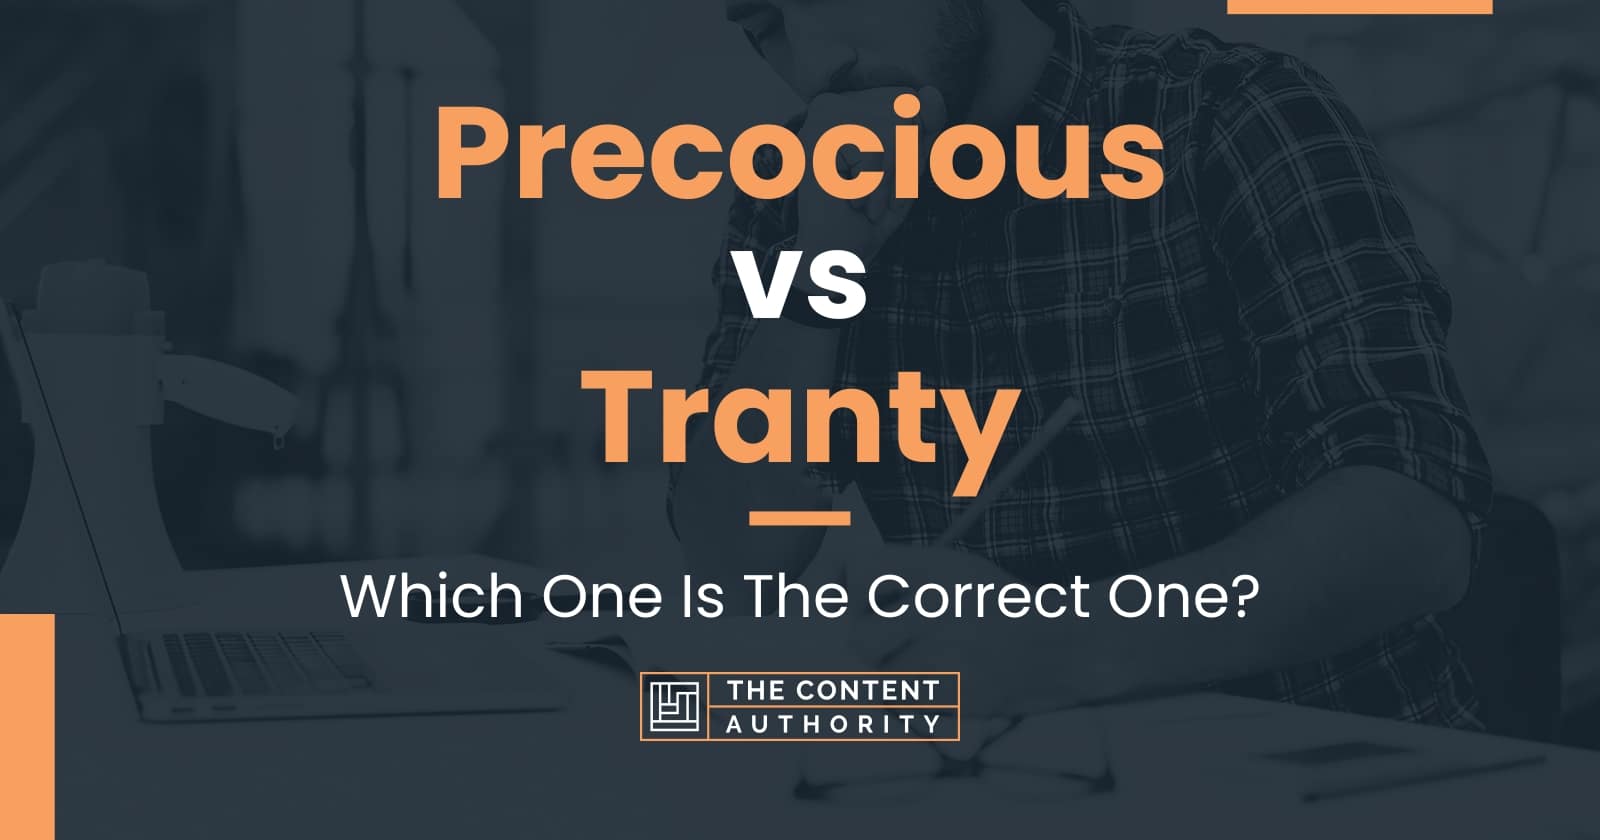 Precocious vs Tranty: Which One Is The Correct One?